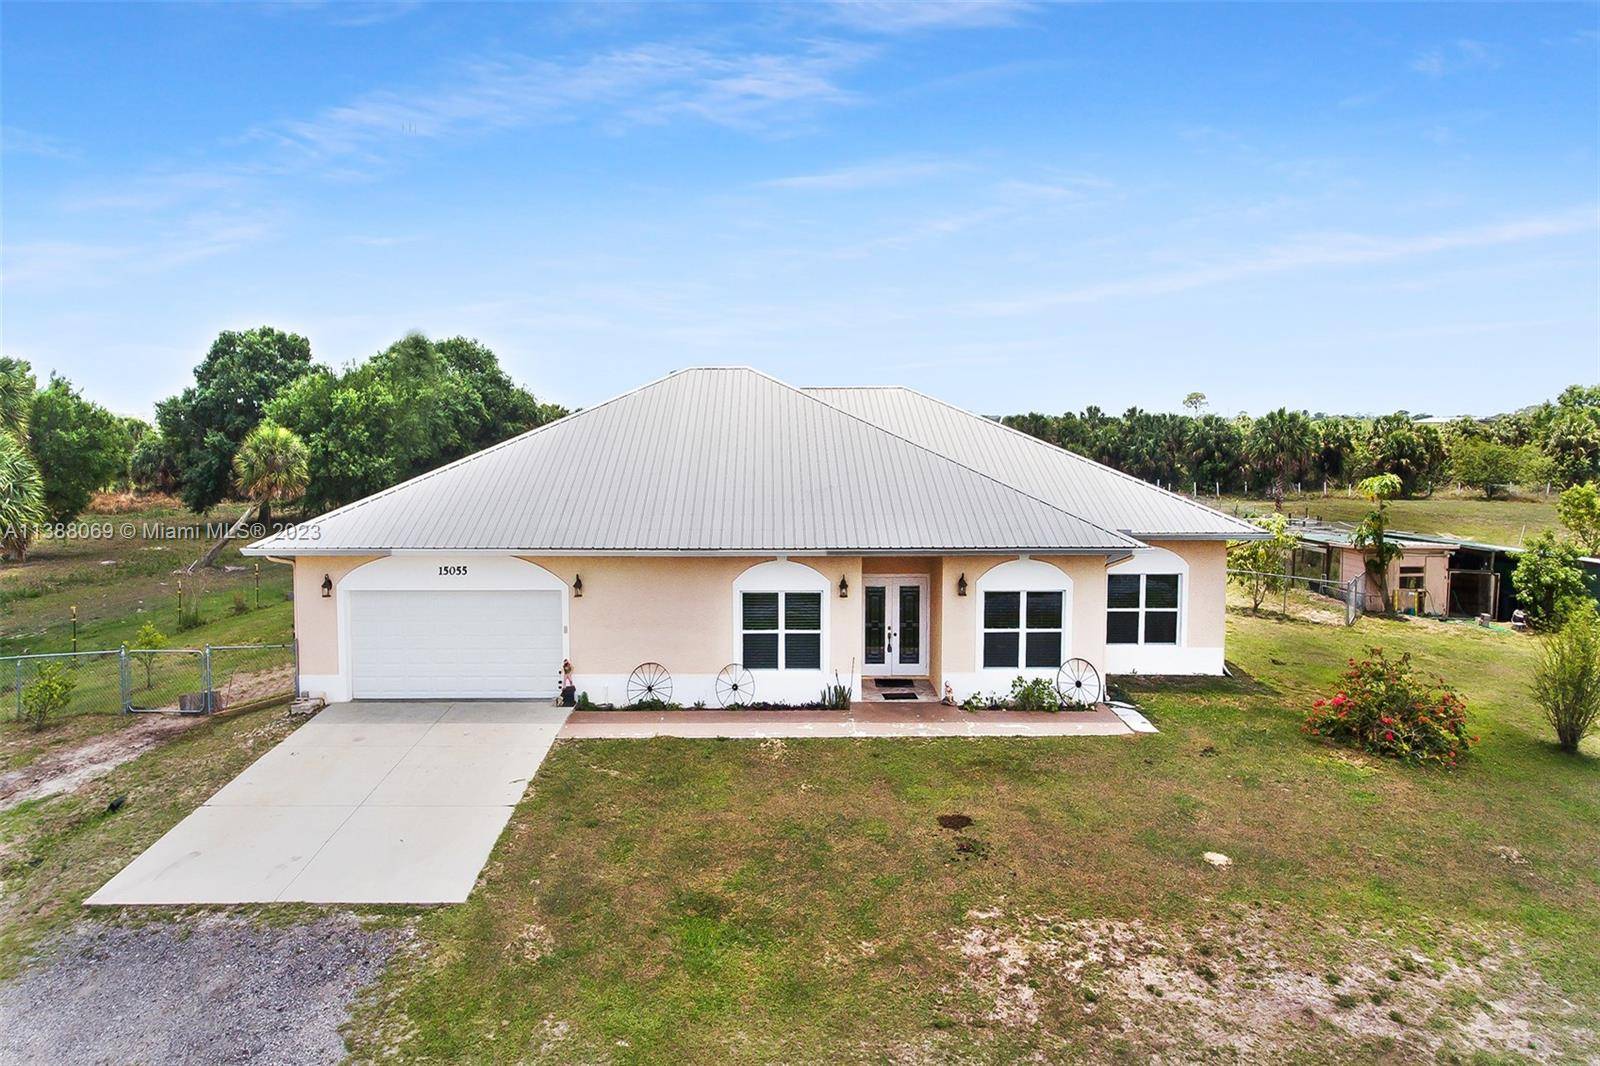 BREATHTAKING 3 BED, 3 BATH ESTATE HOME ON 10 ACRES OVERLOOKING A PICTURESQUE POND IN THE BEAUTIFUL COMMUNITY OF FELLSMERE FARMS.